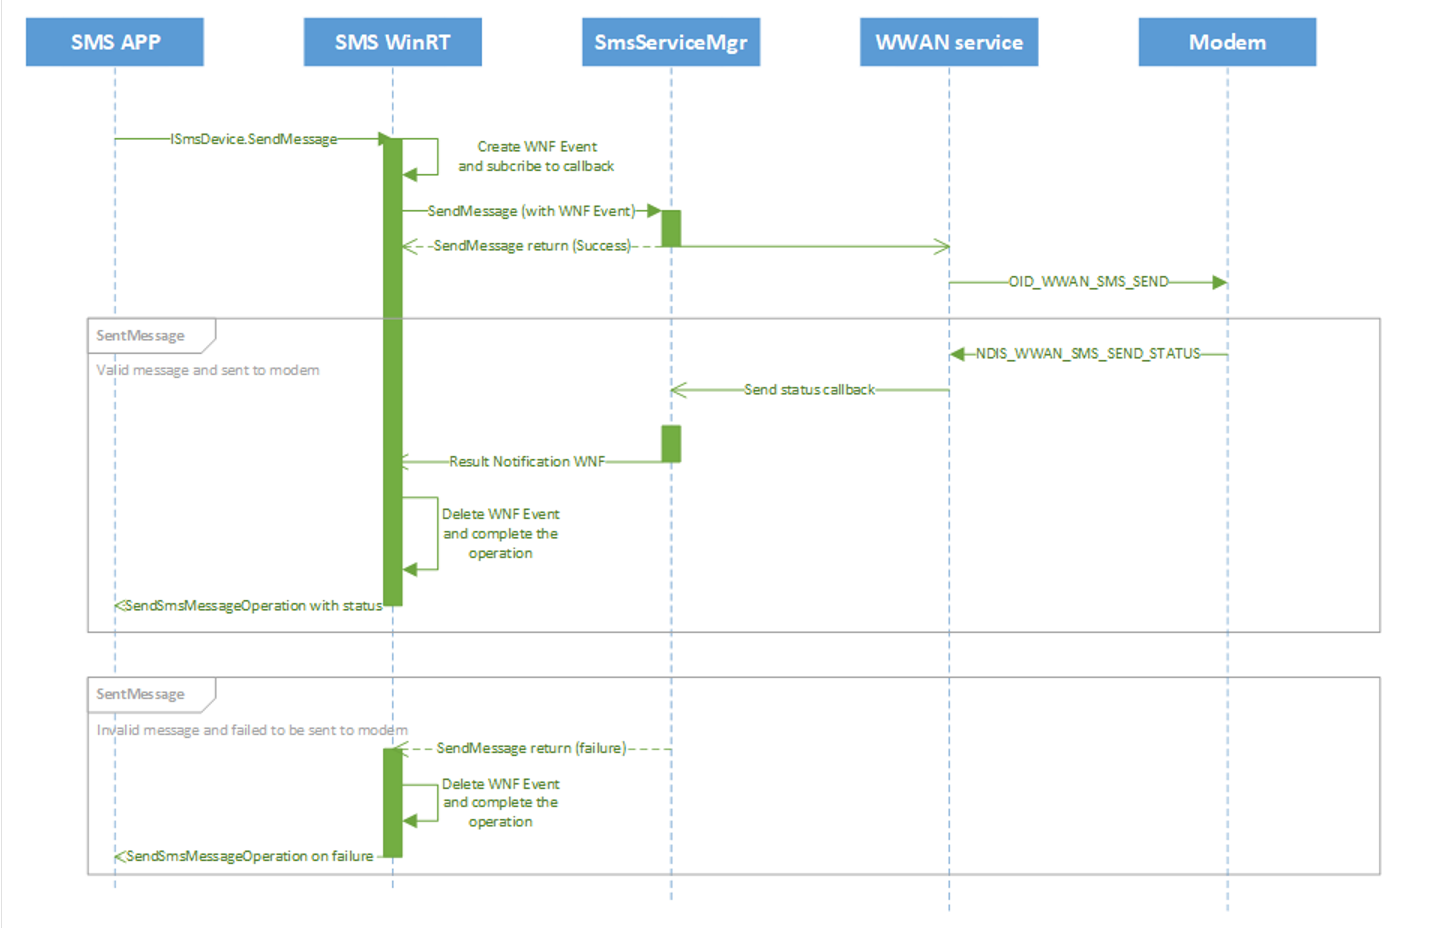 Diagram that shows the SMS send message process.